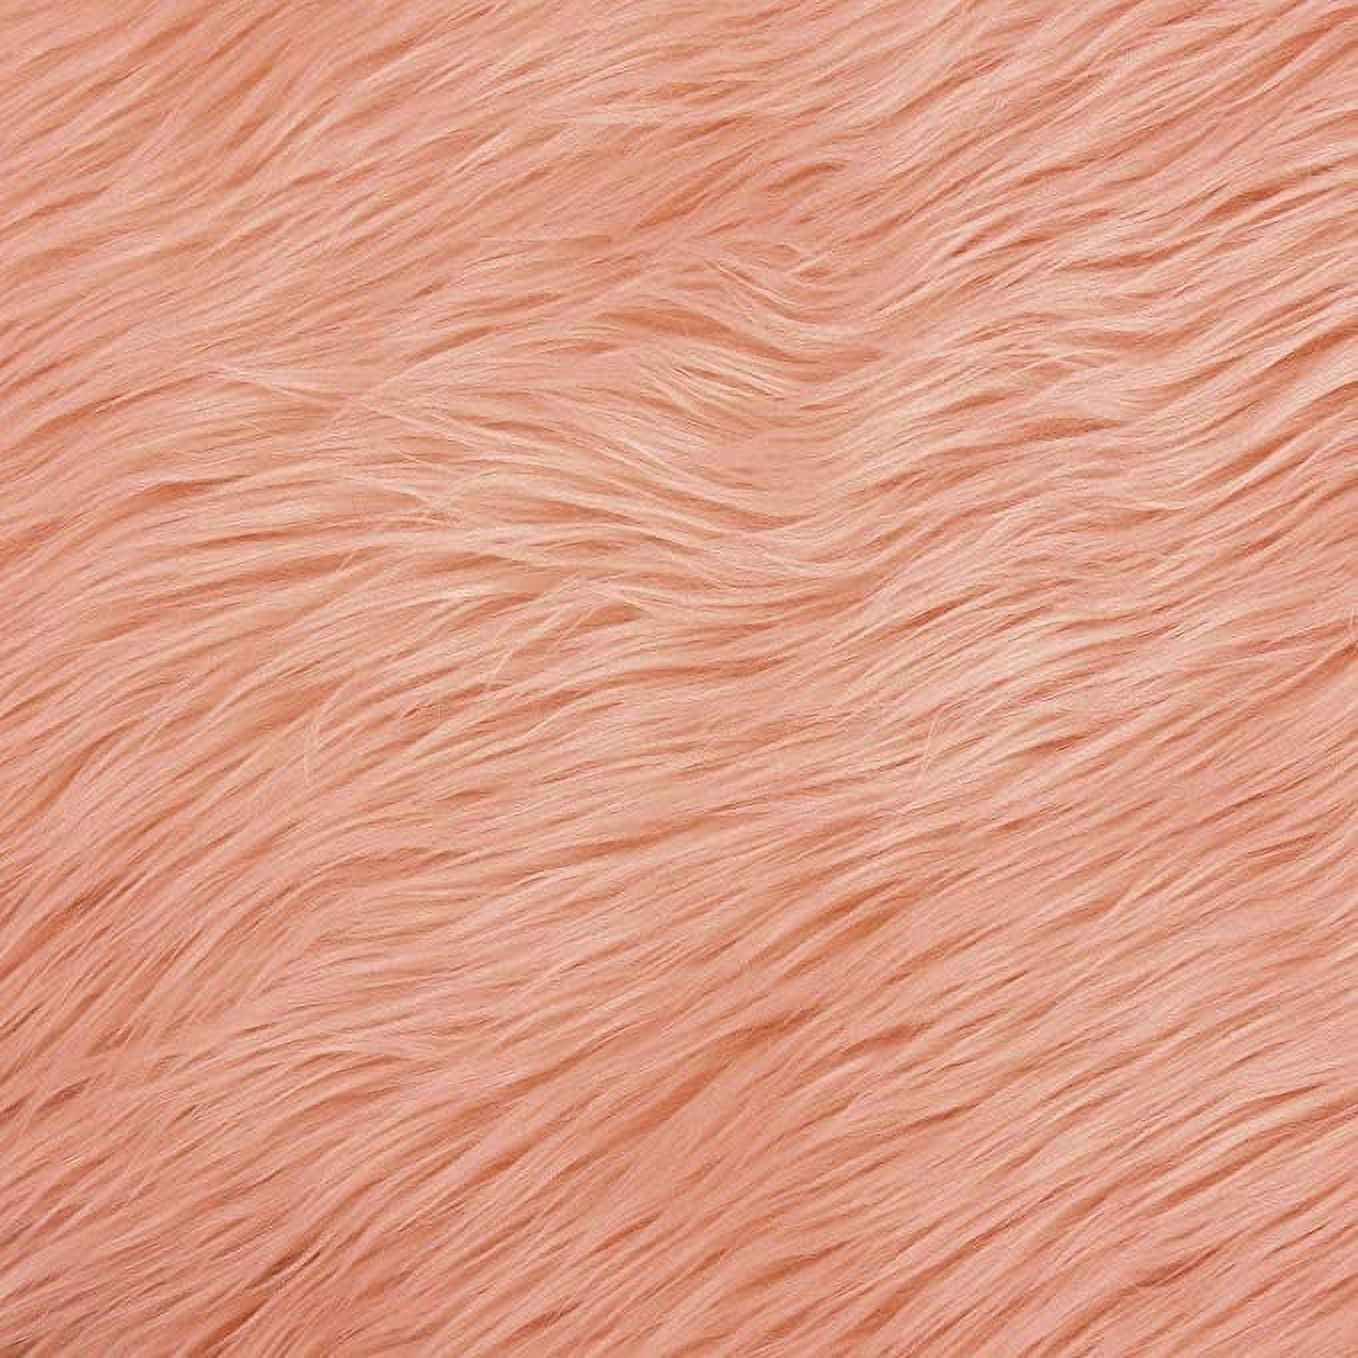 FabricLA Shaggy Faux Fur Fabric by The Yard - 144 x 60 Inches (365 cm x  150 cm) - Craft furry fabric for Sewing Apparel, Rugs, Pillows, Faux Fluffy  Fabric - Black, 4 Continuous Yards